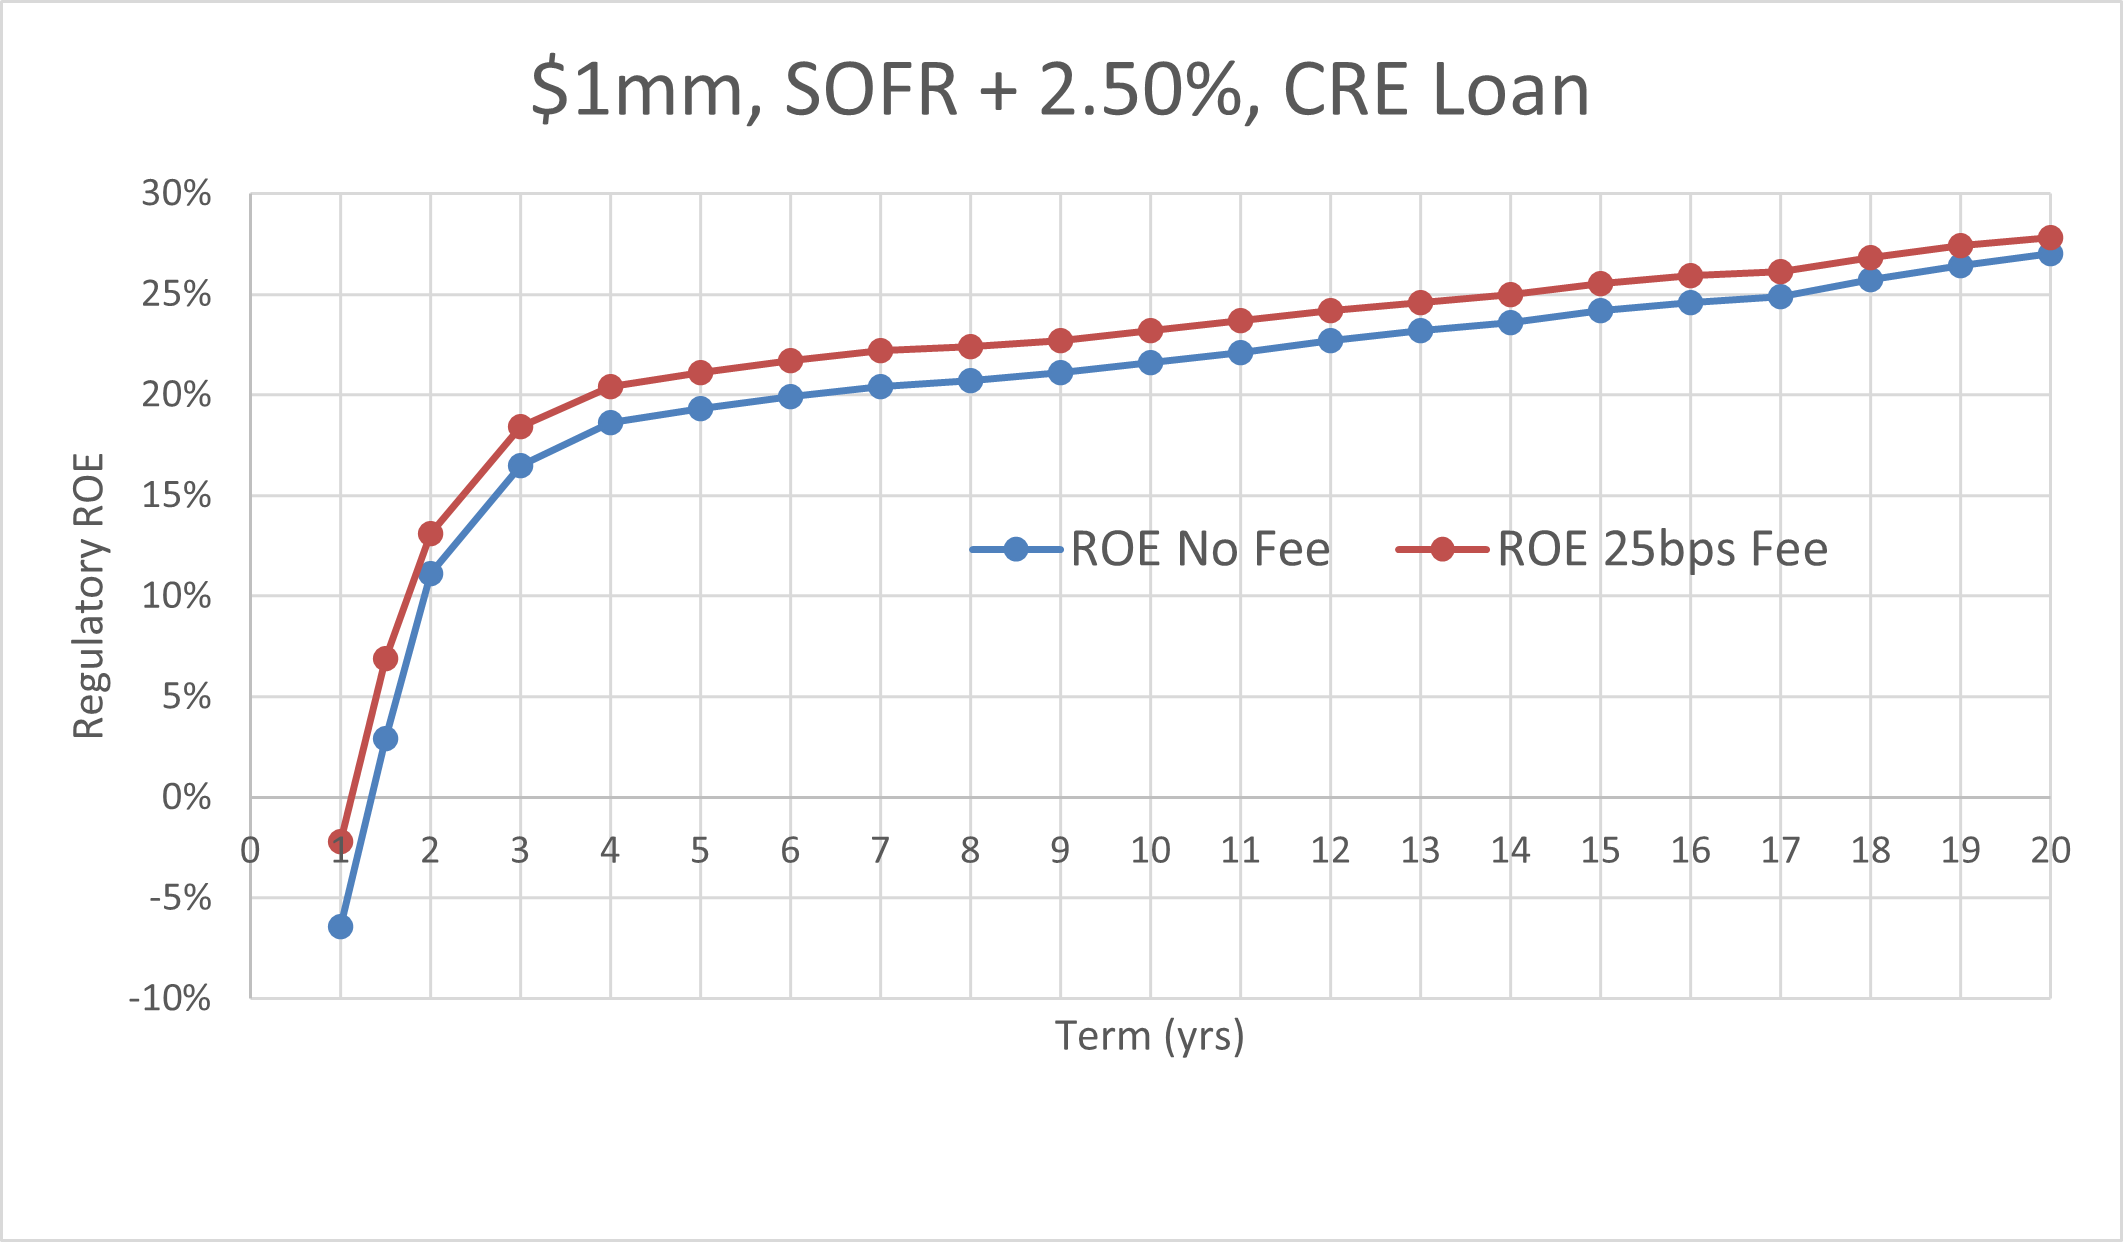 IMpact of Fee Income on ROE